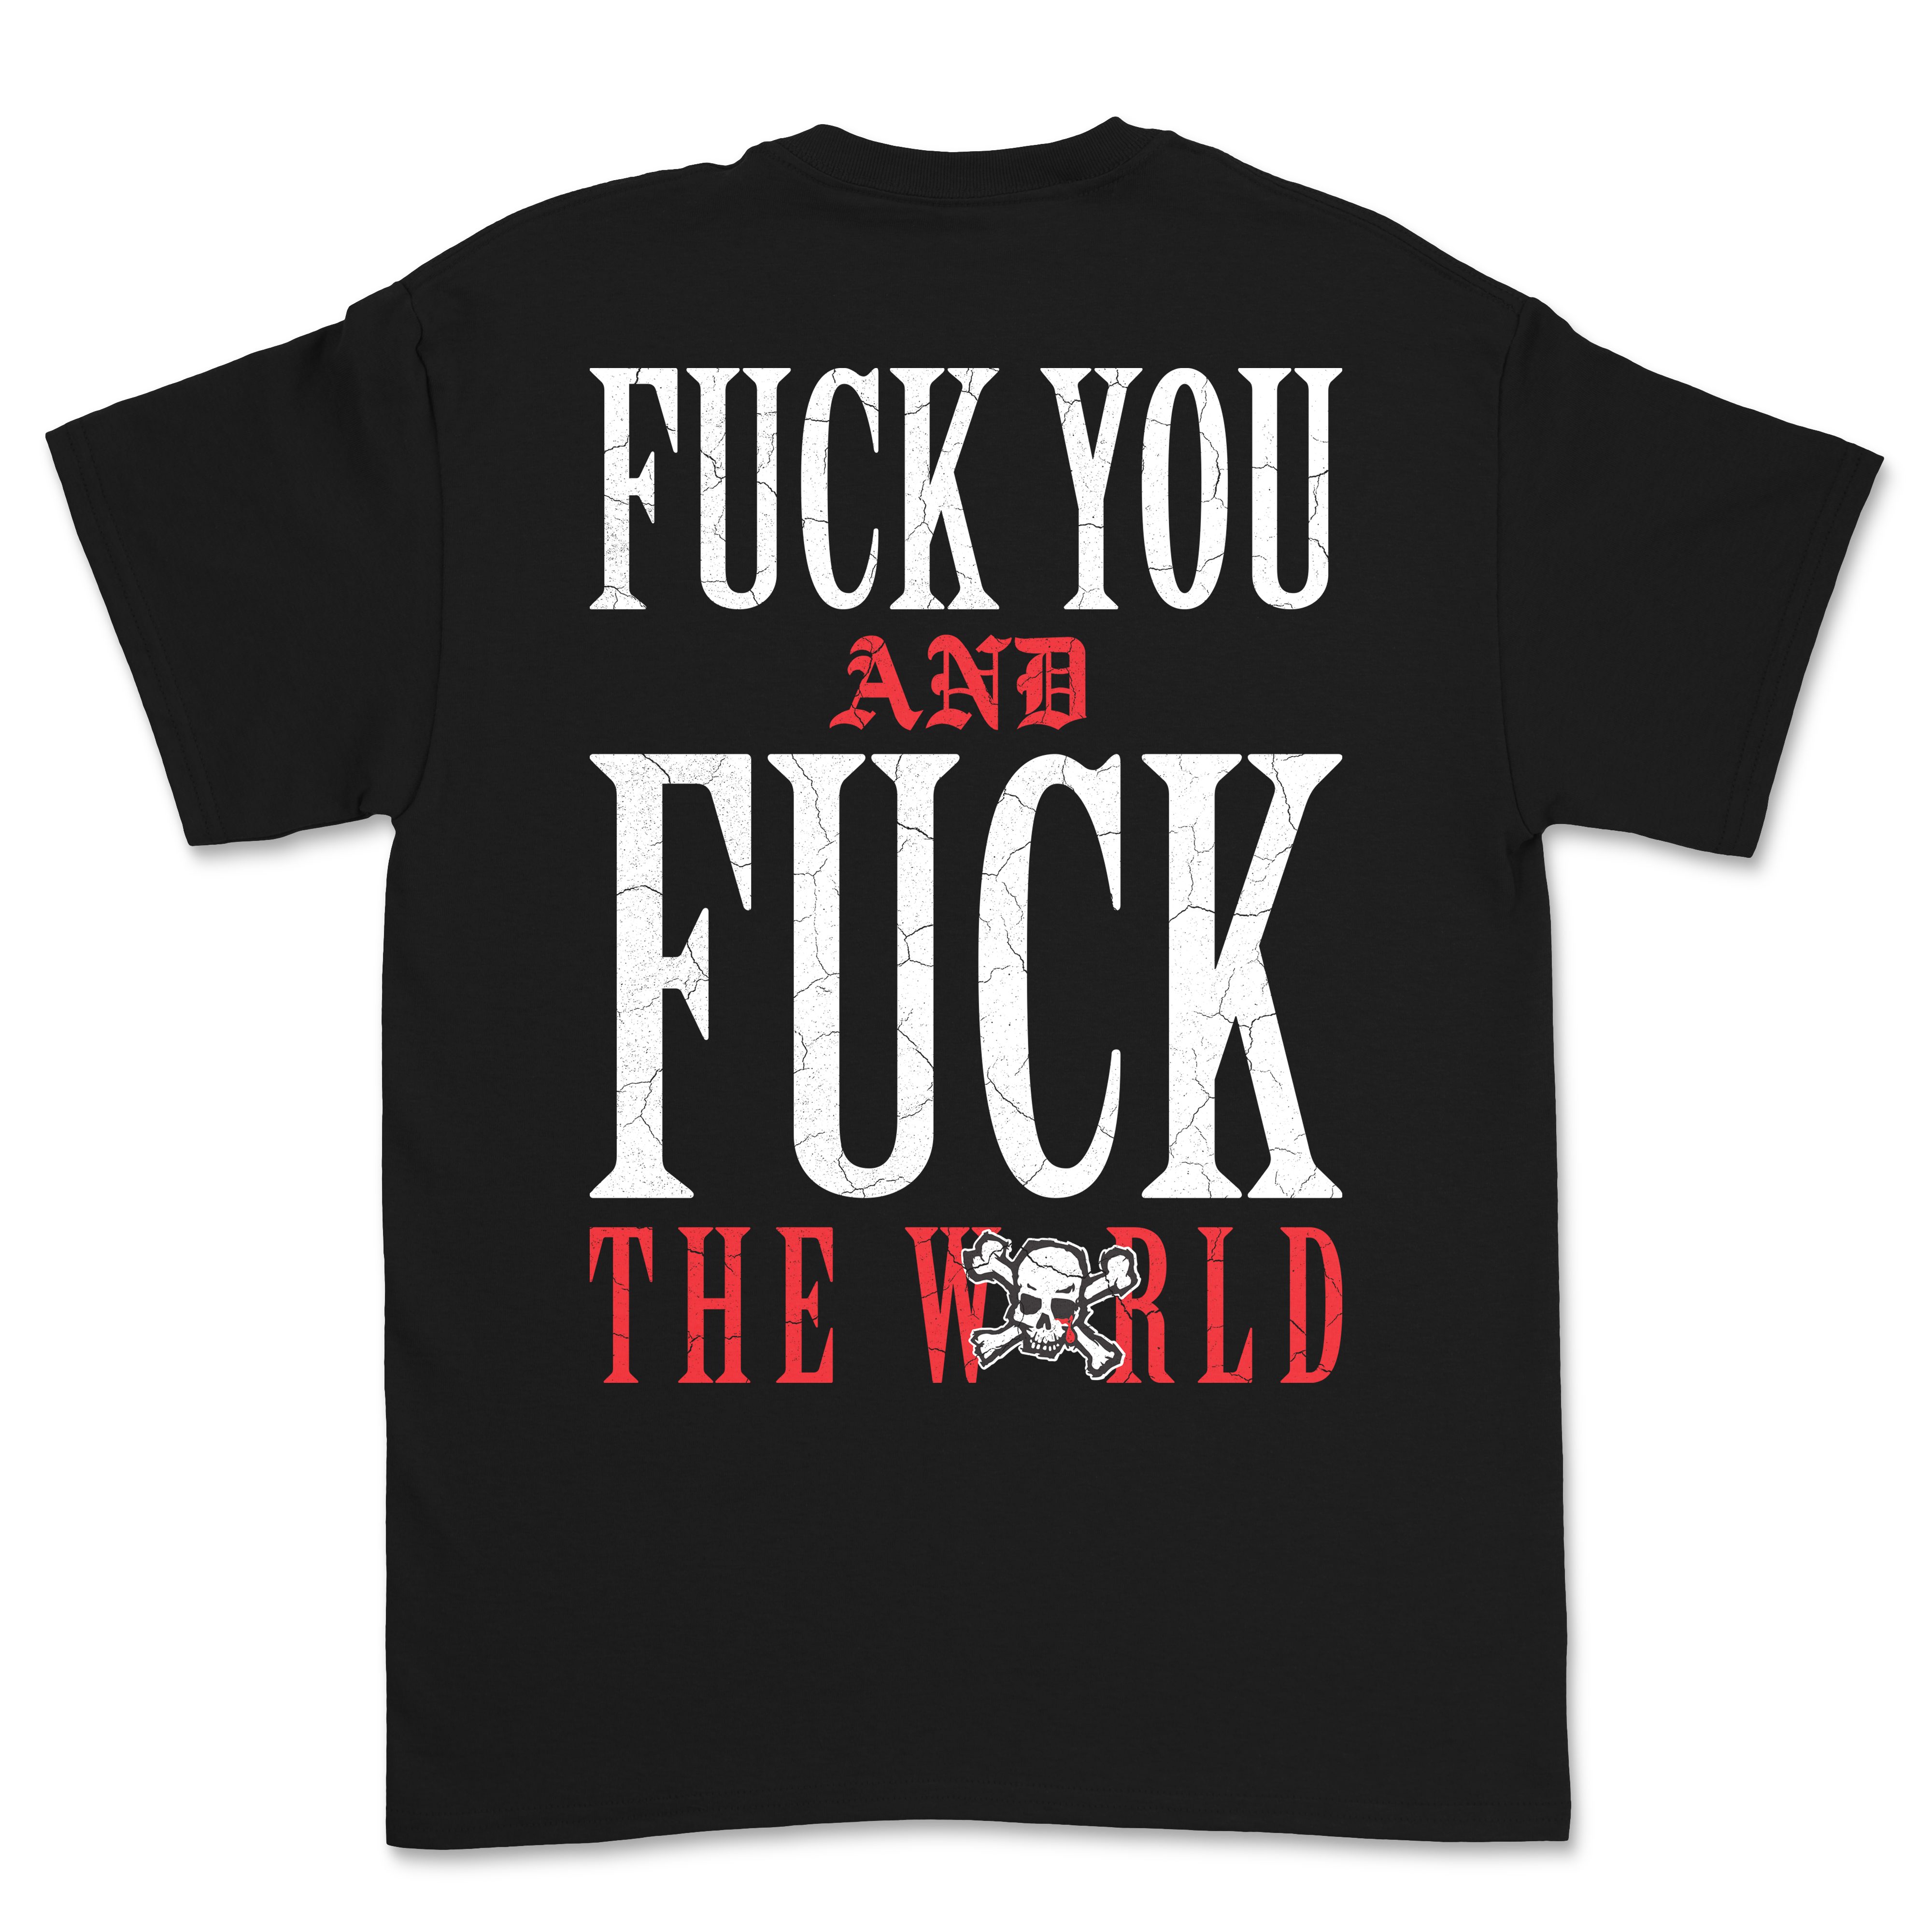 The World - Blood For Blood Rip Shirt